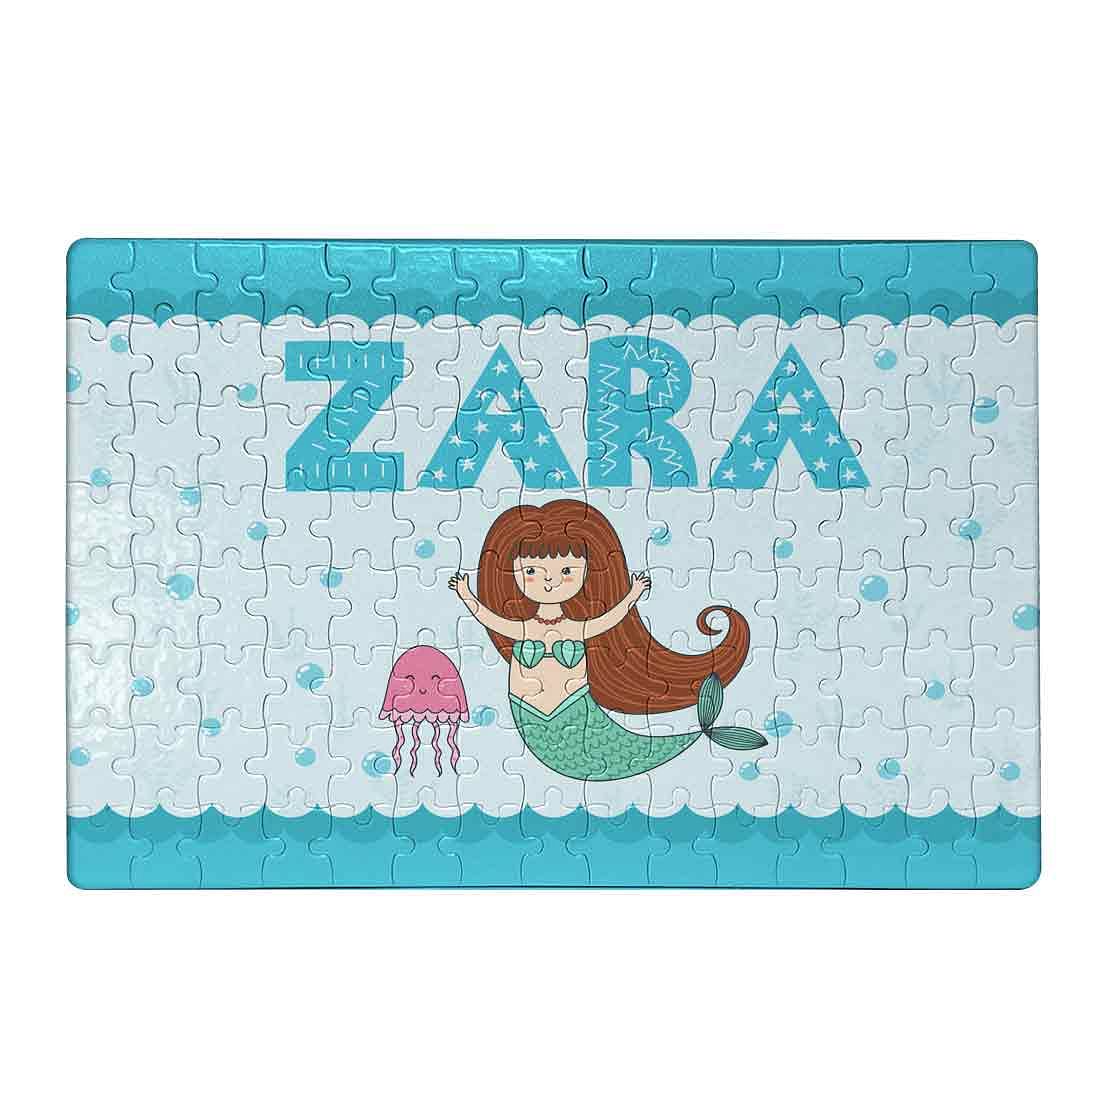 Personalized Name Puzzle - Cute Mermaid Nutcase